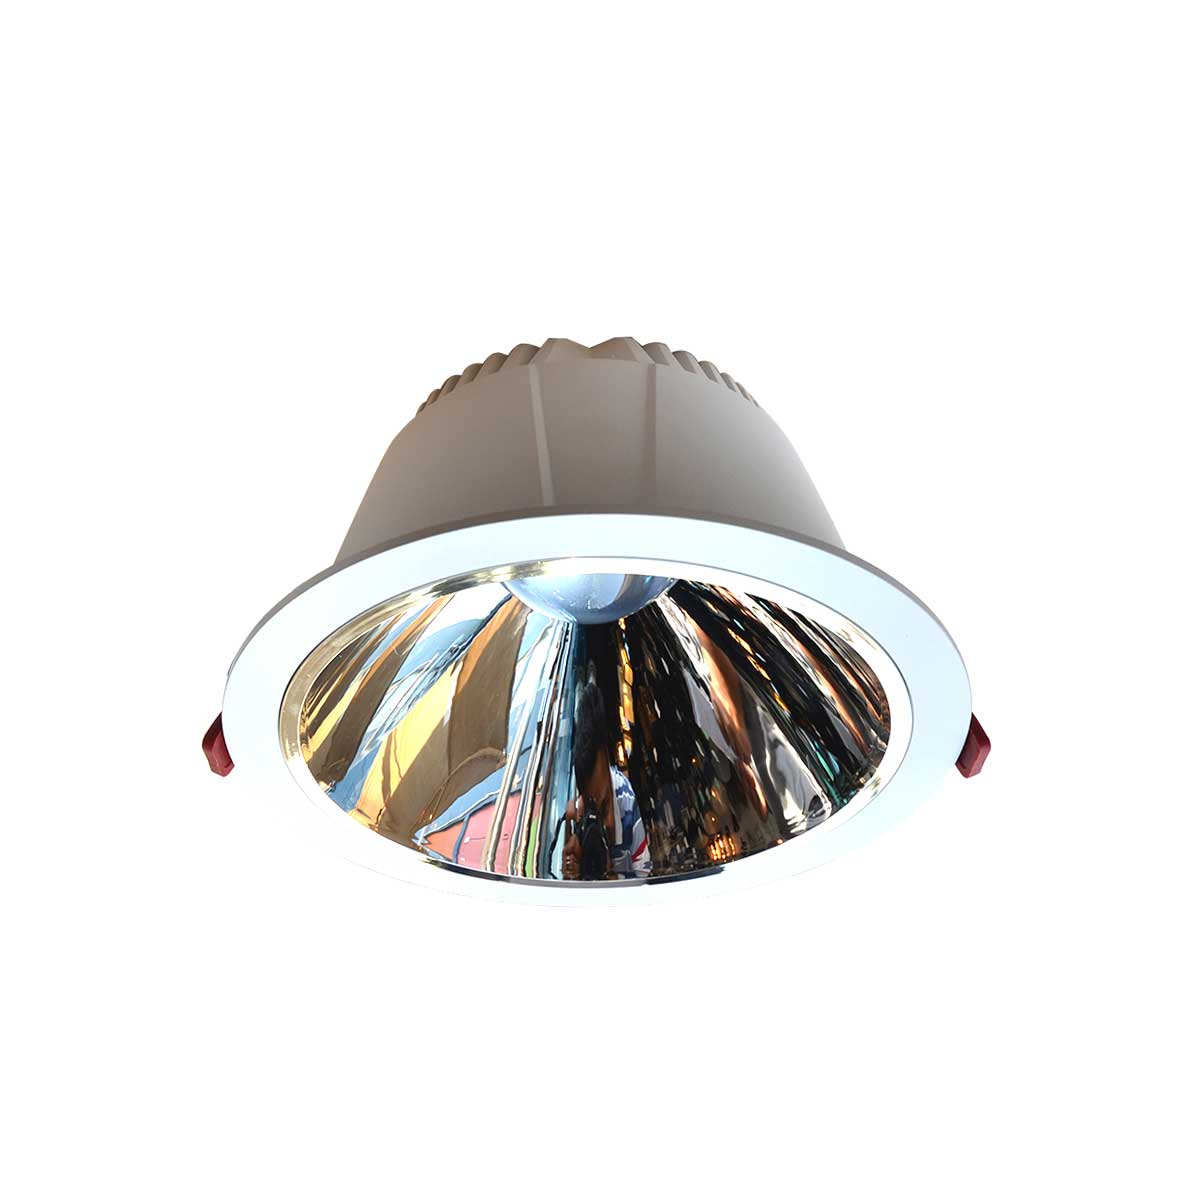 Indoor Direct Spotlight MH-L1115- 30W SMD IP65 3000K- Warm White